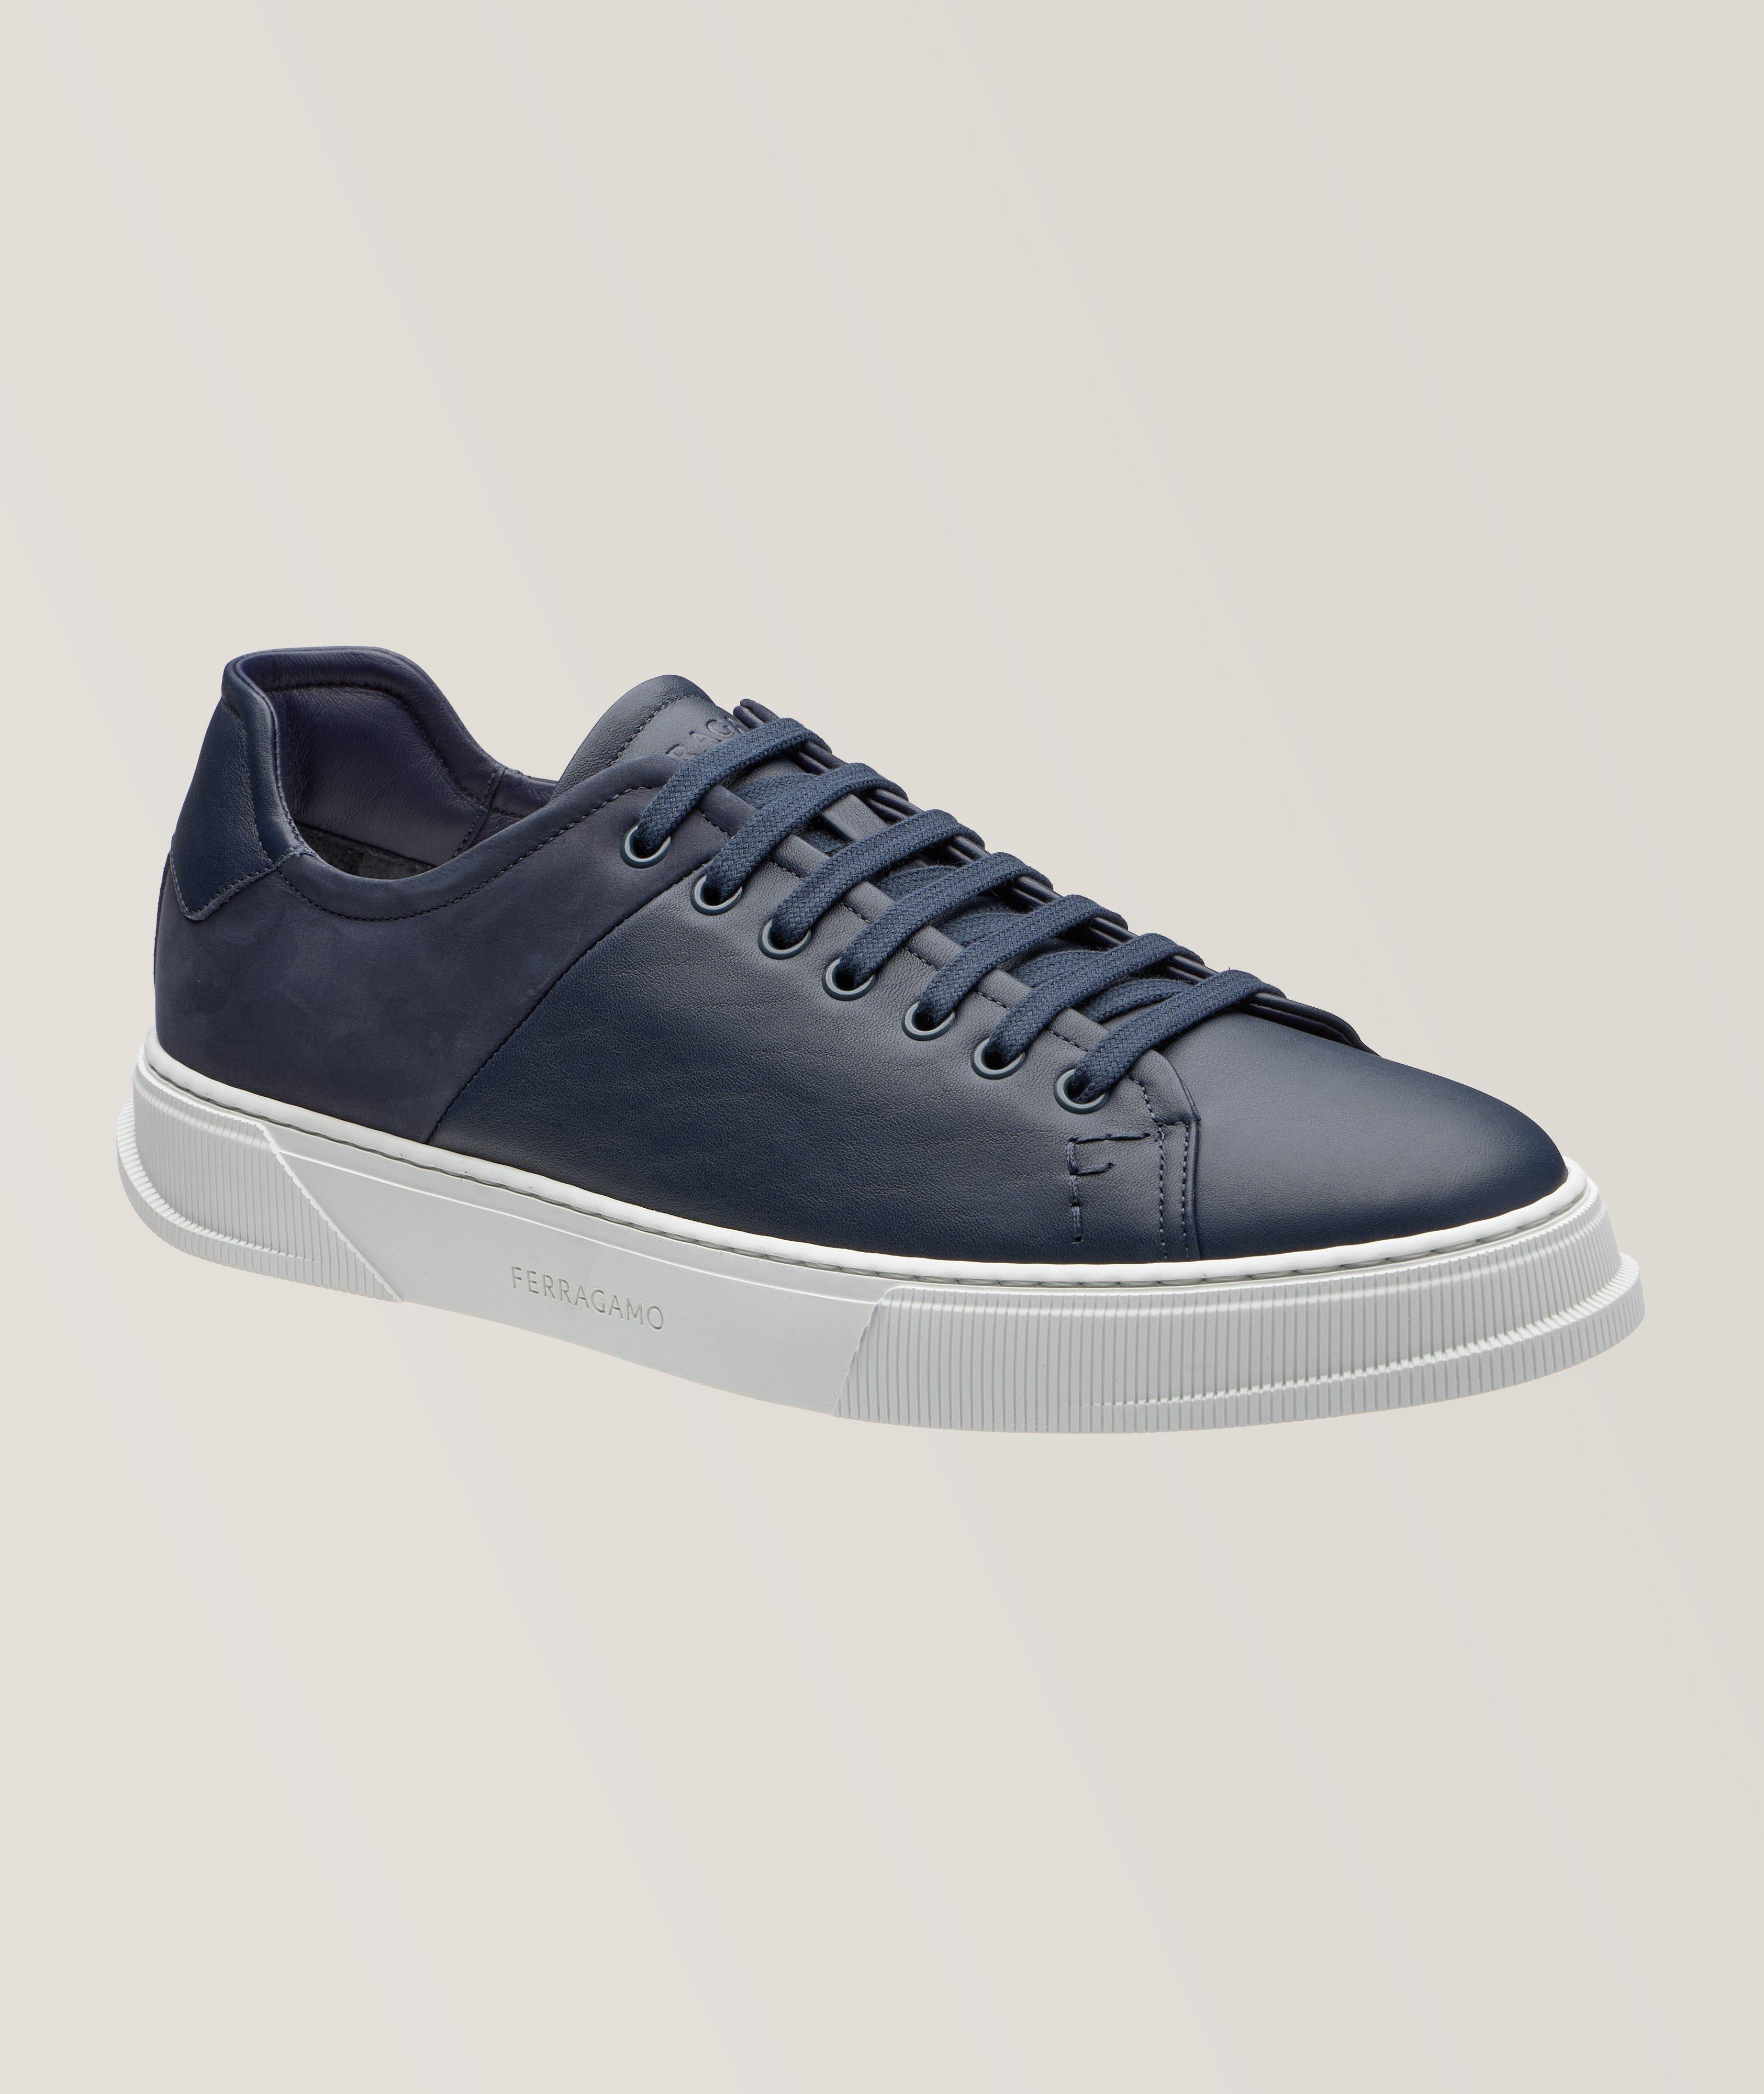 Clayton 1 Leather Sneakers